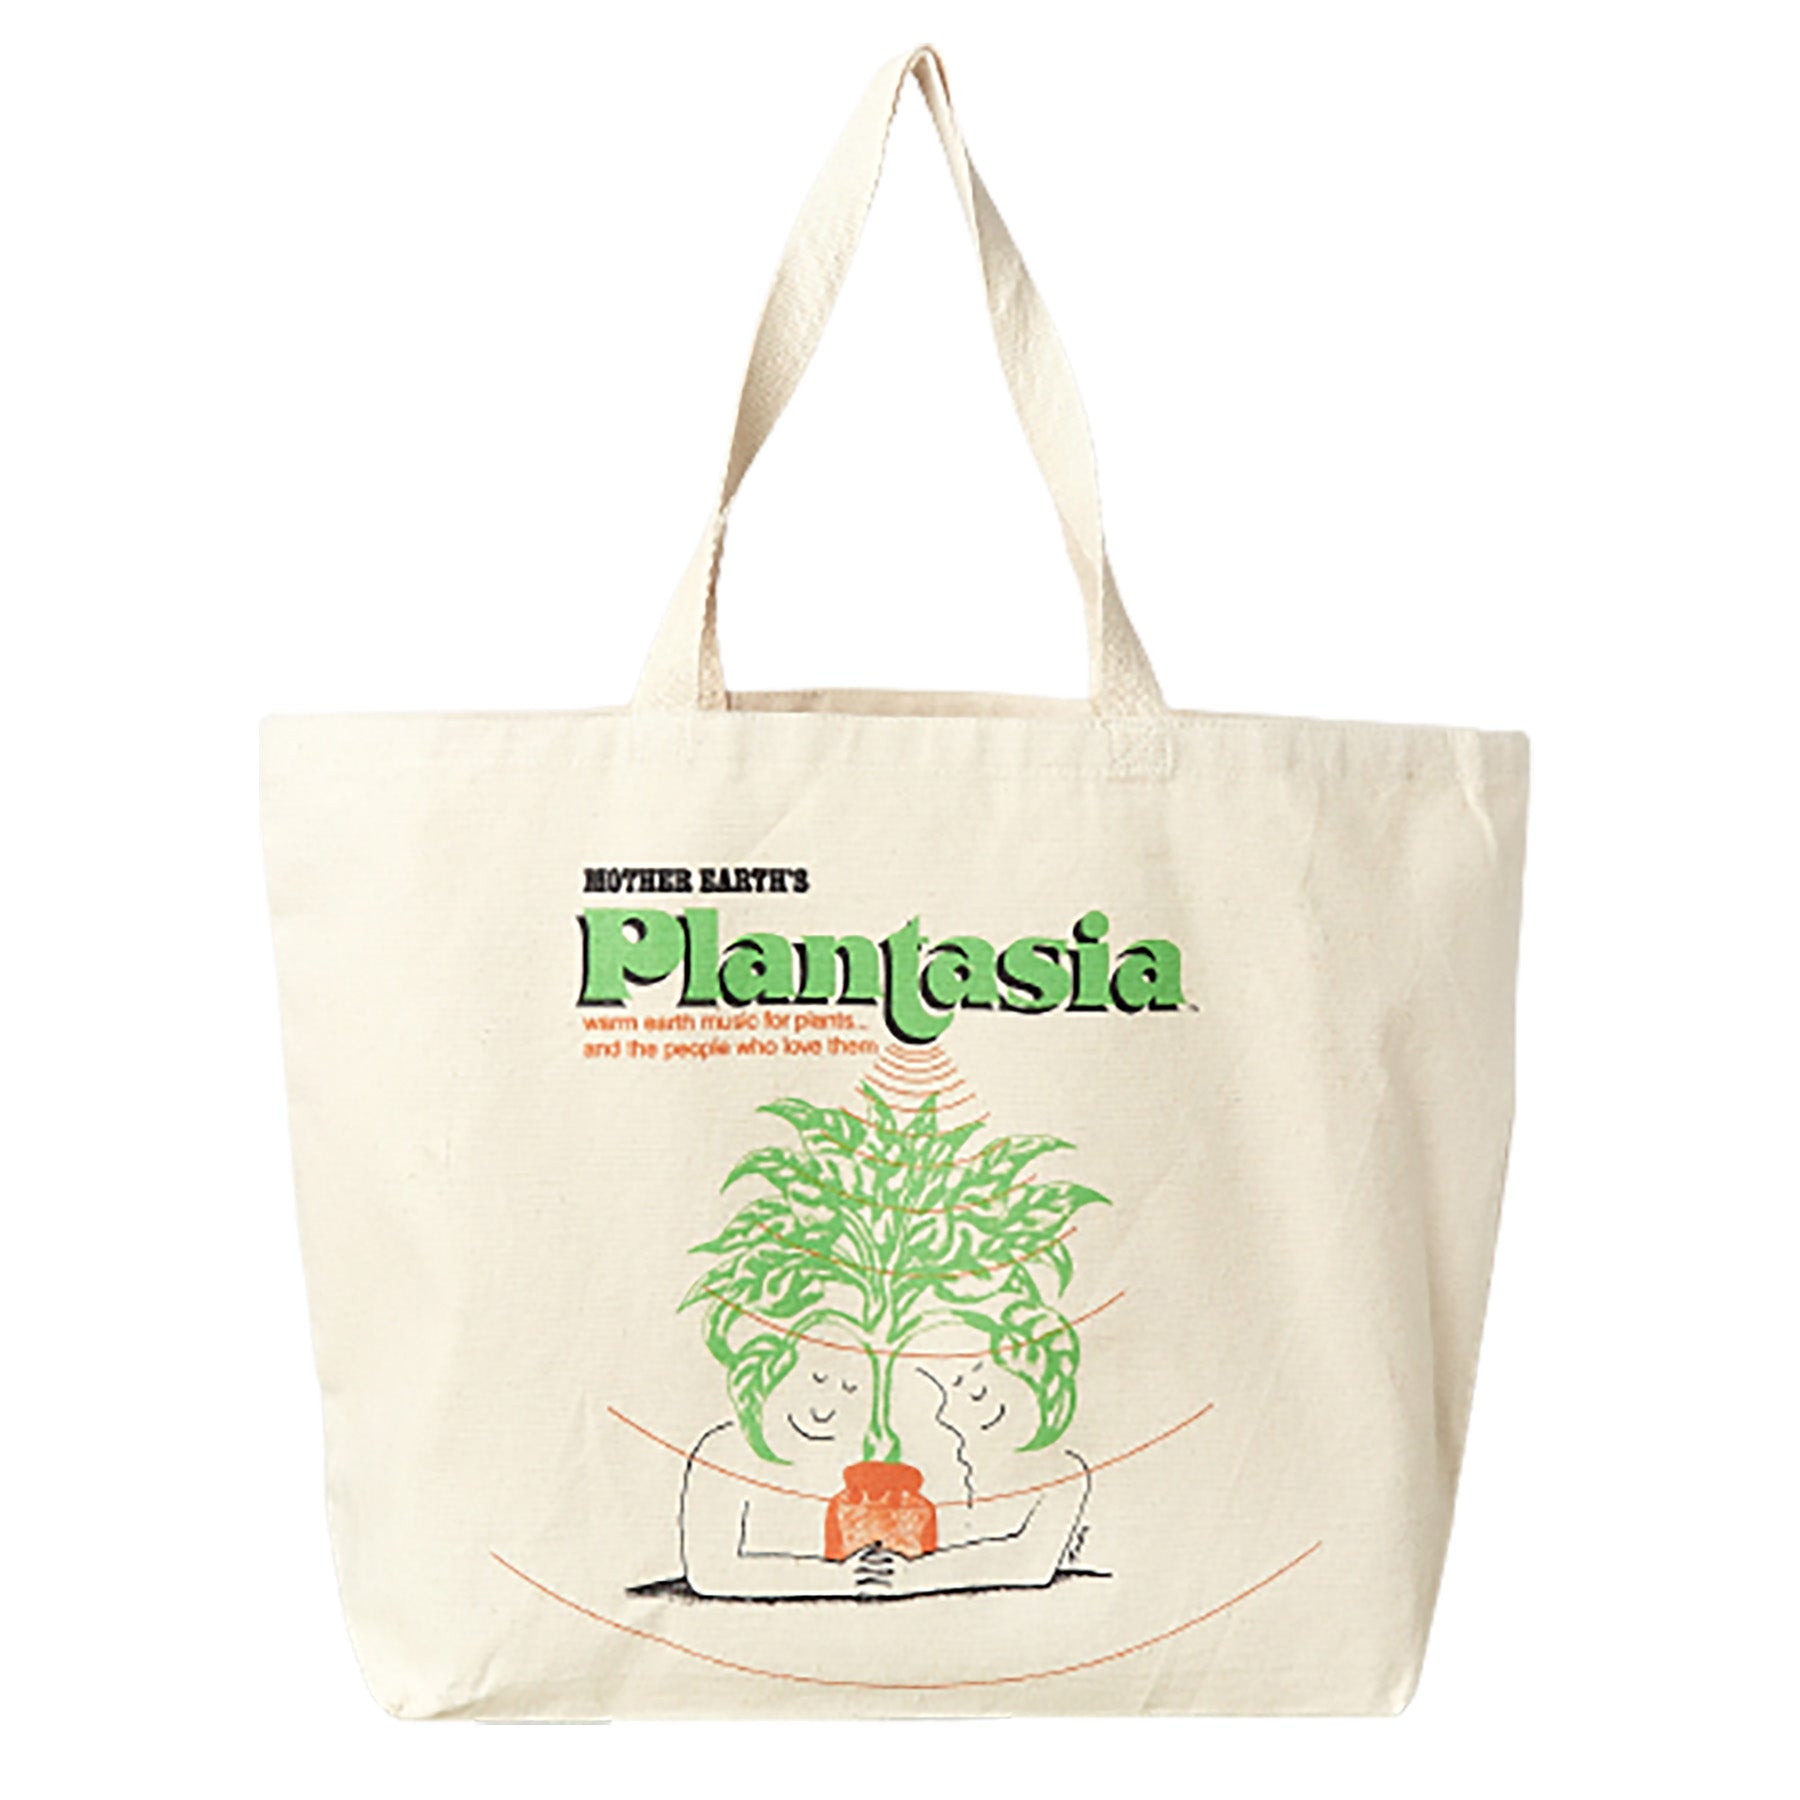 A tote bag with the words plantasa on it, perfect for carrying your gardening tools from the best garden nursery near me.